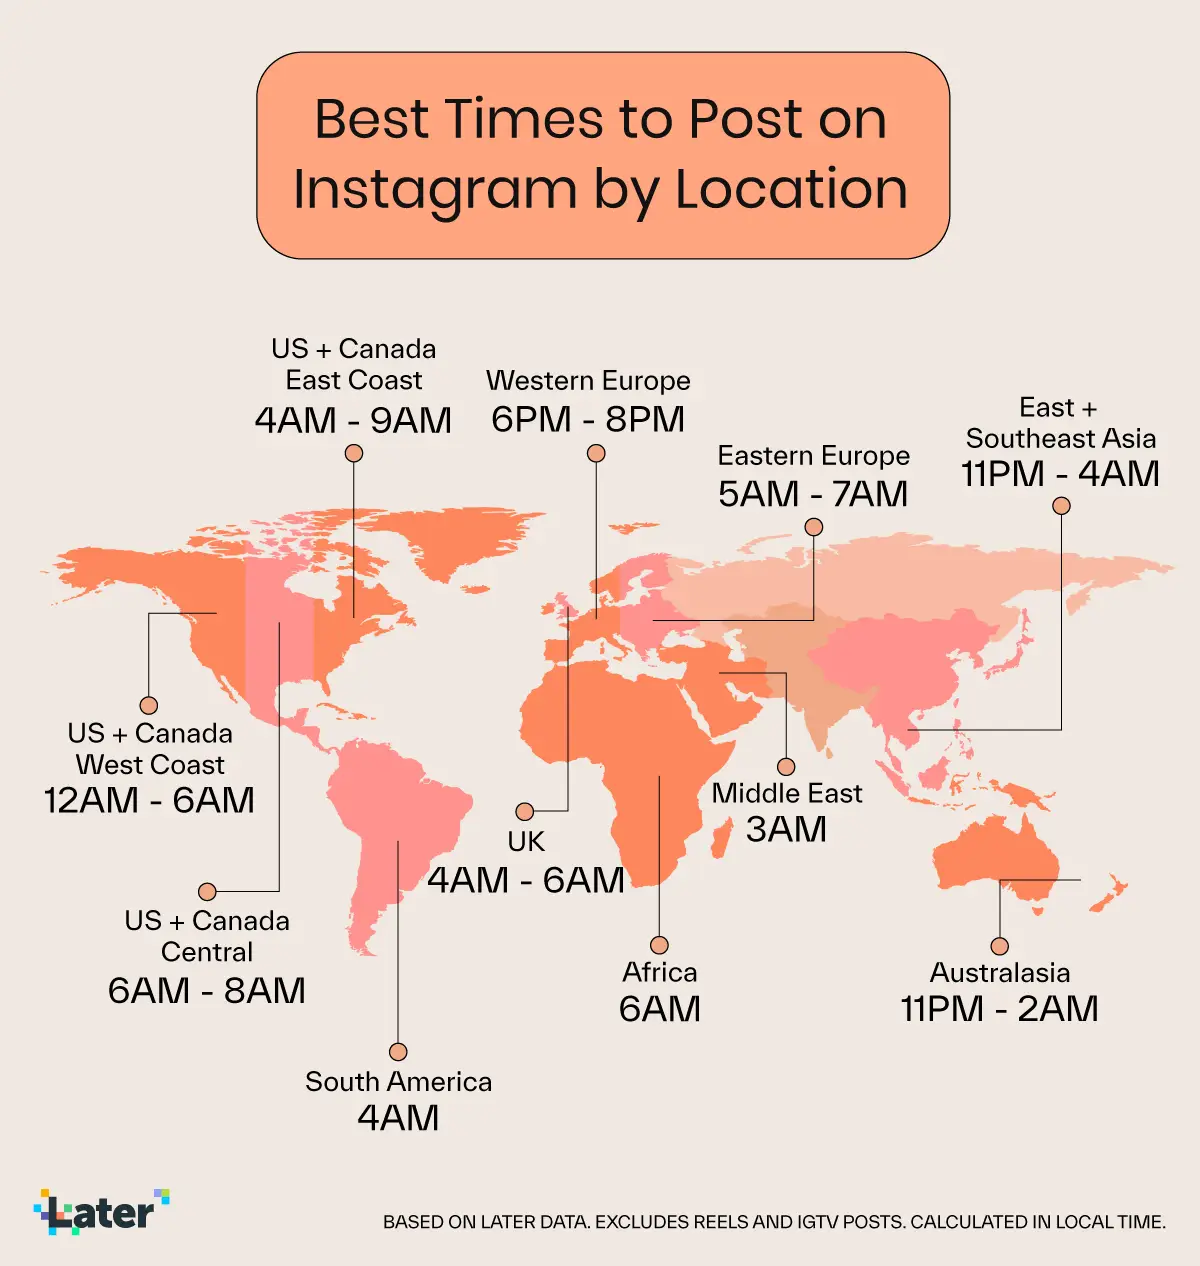 Check Your Insights for the Best Time to Post